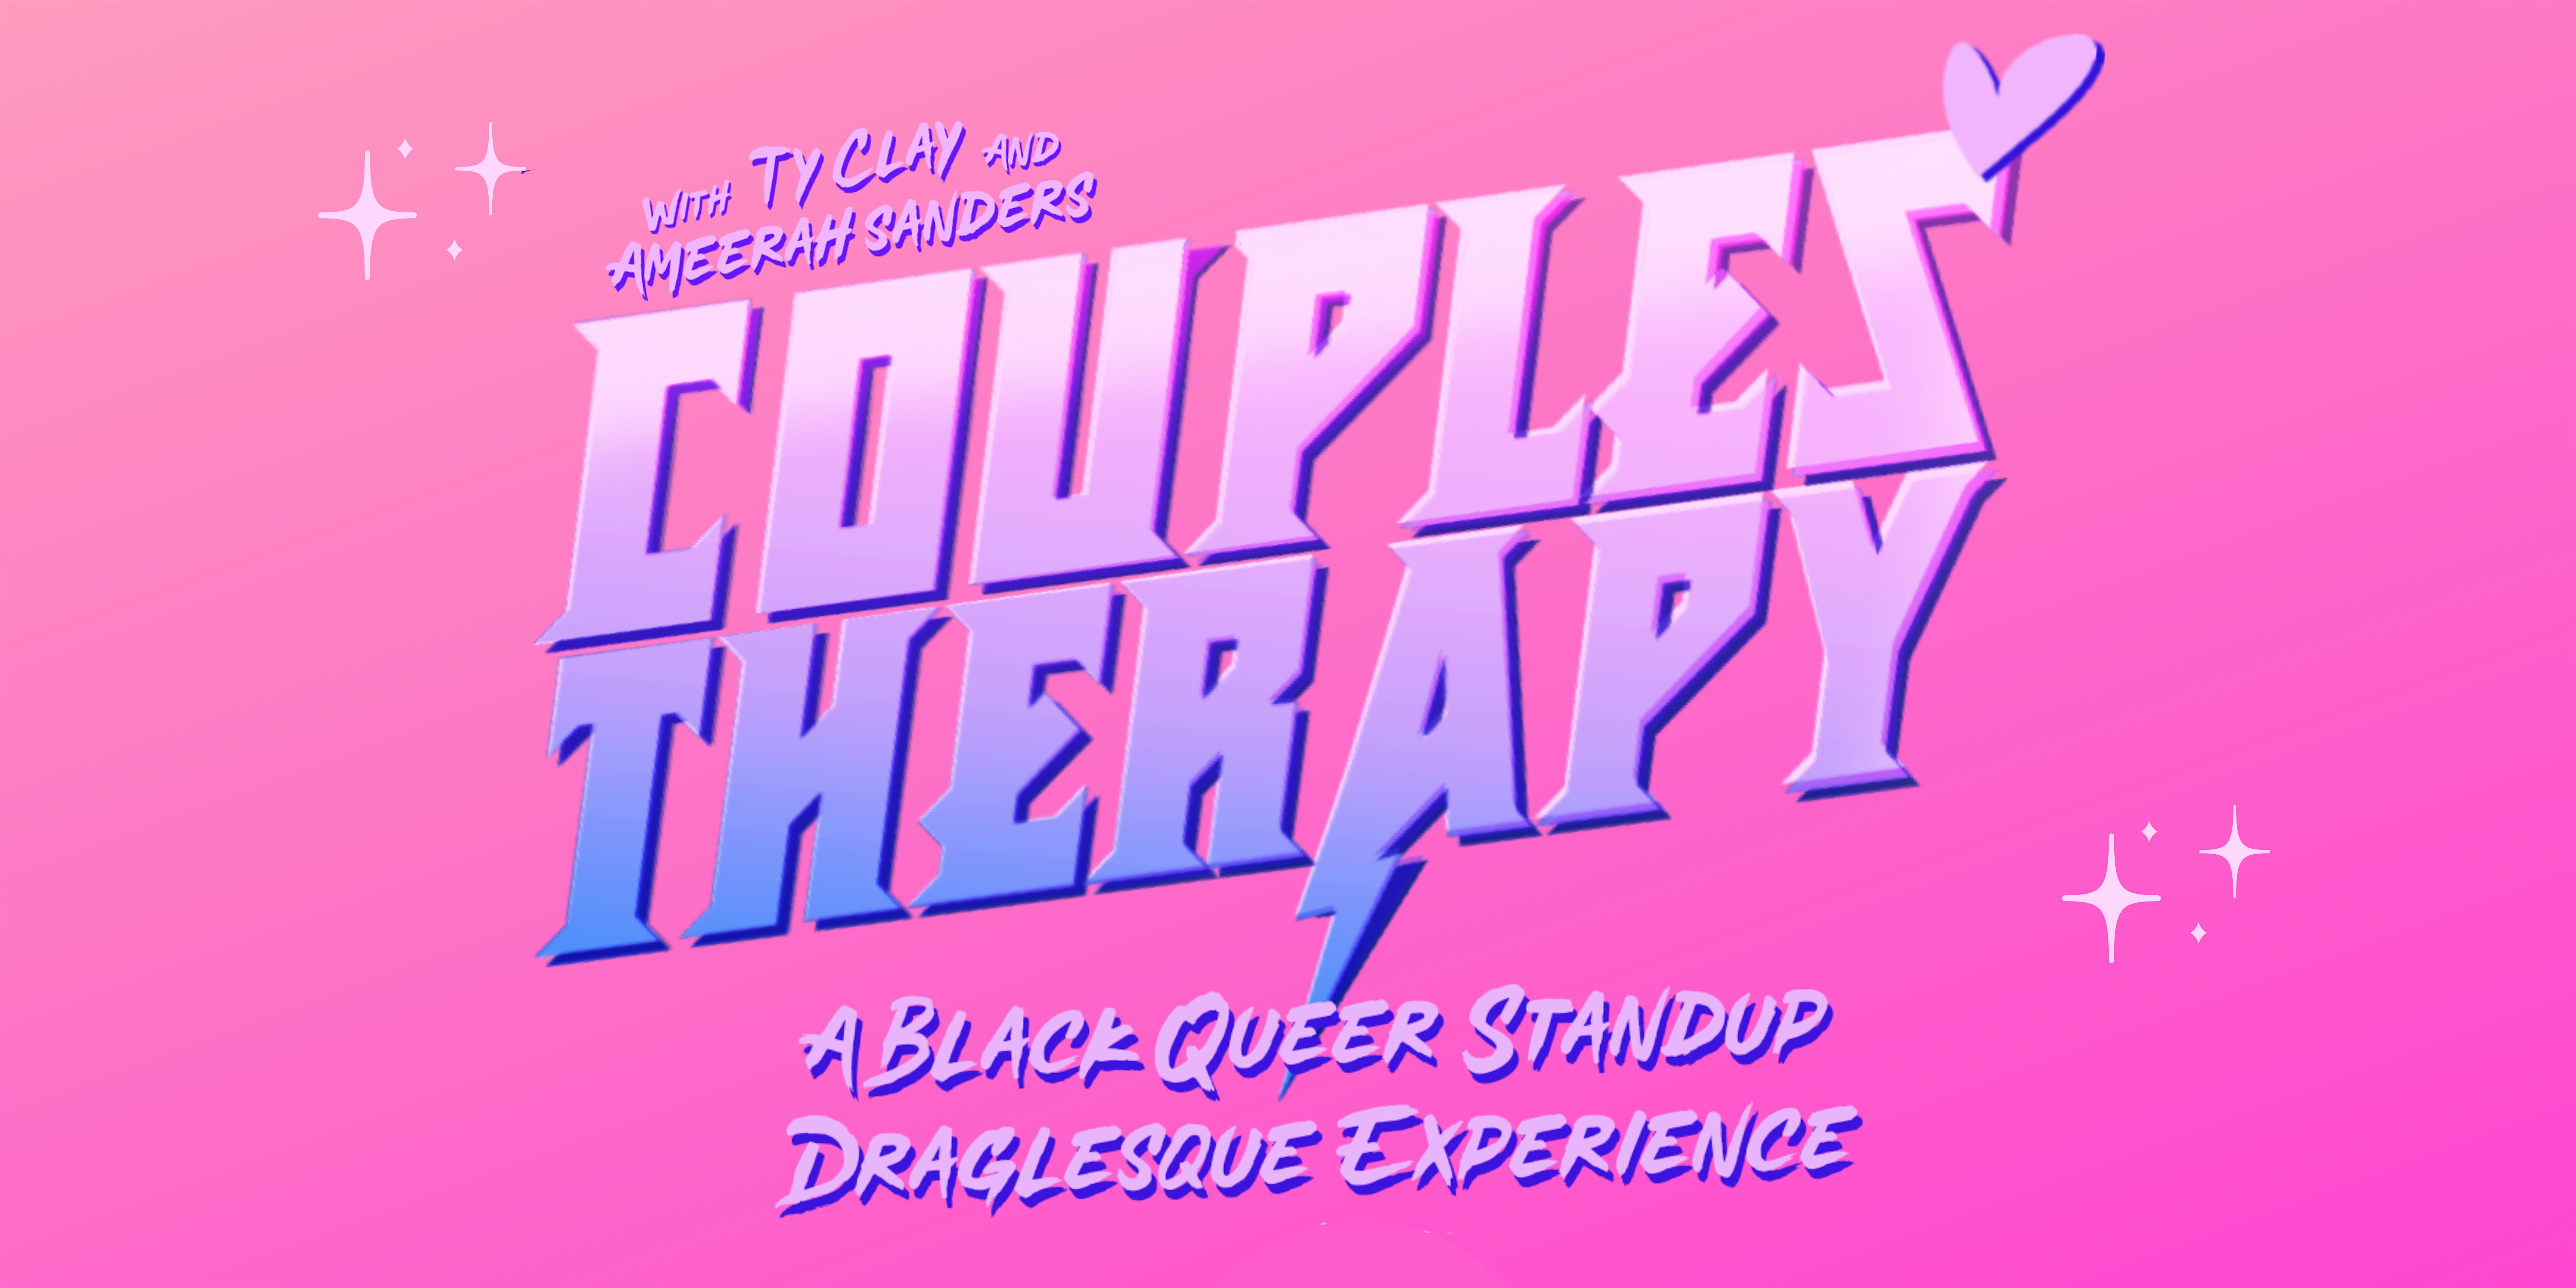 Couple's Therapy: A Black Queer Standup Draglesque Experience